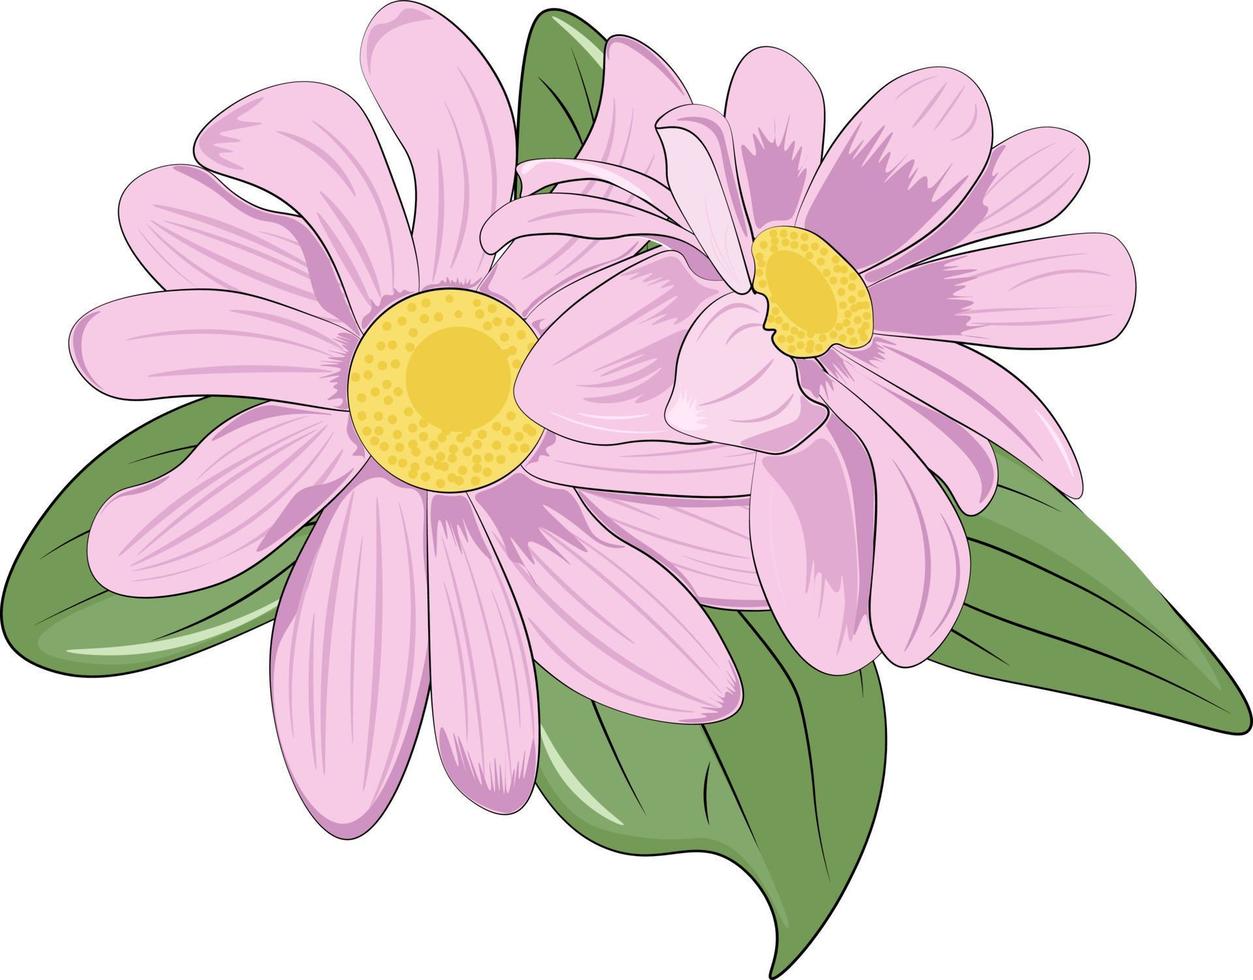 pink daisy isolated on white vector